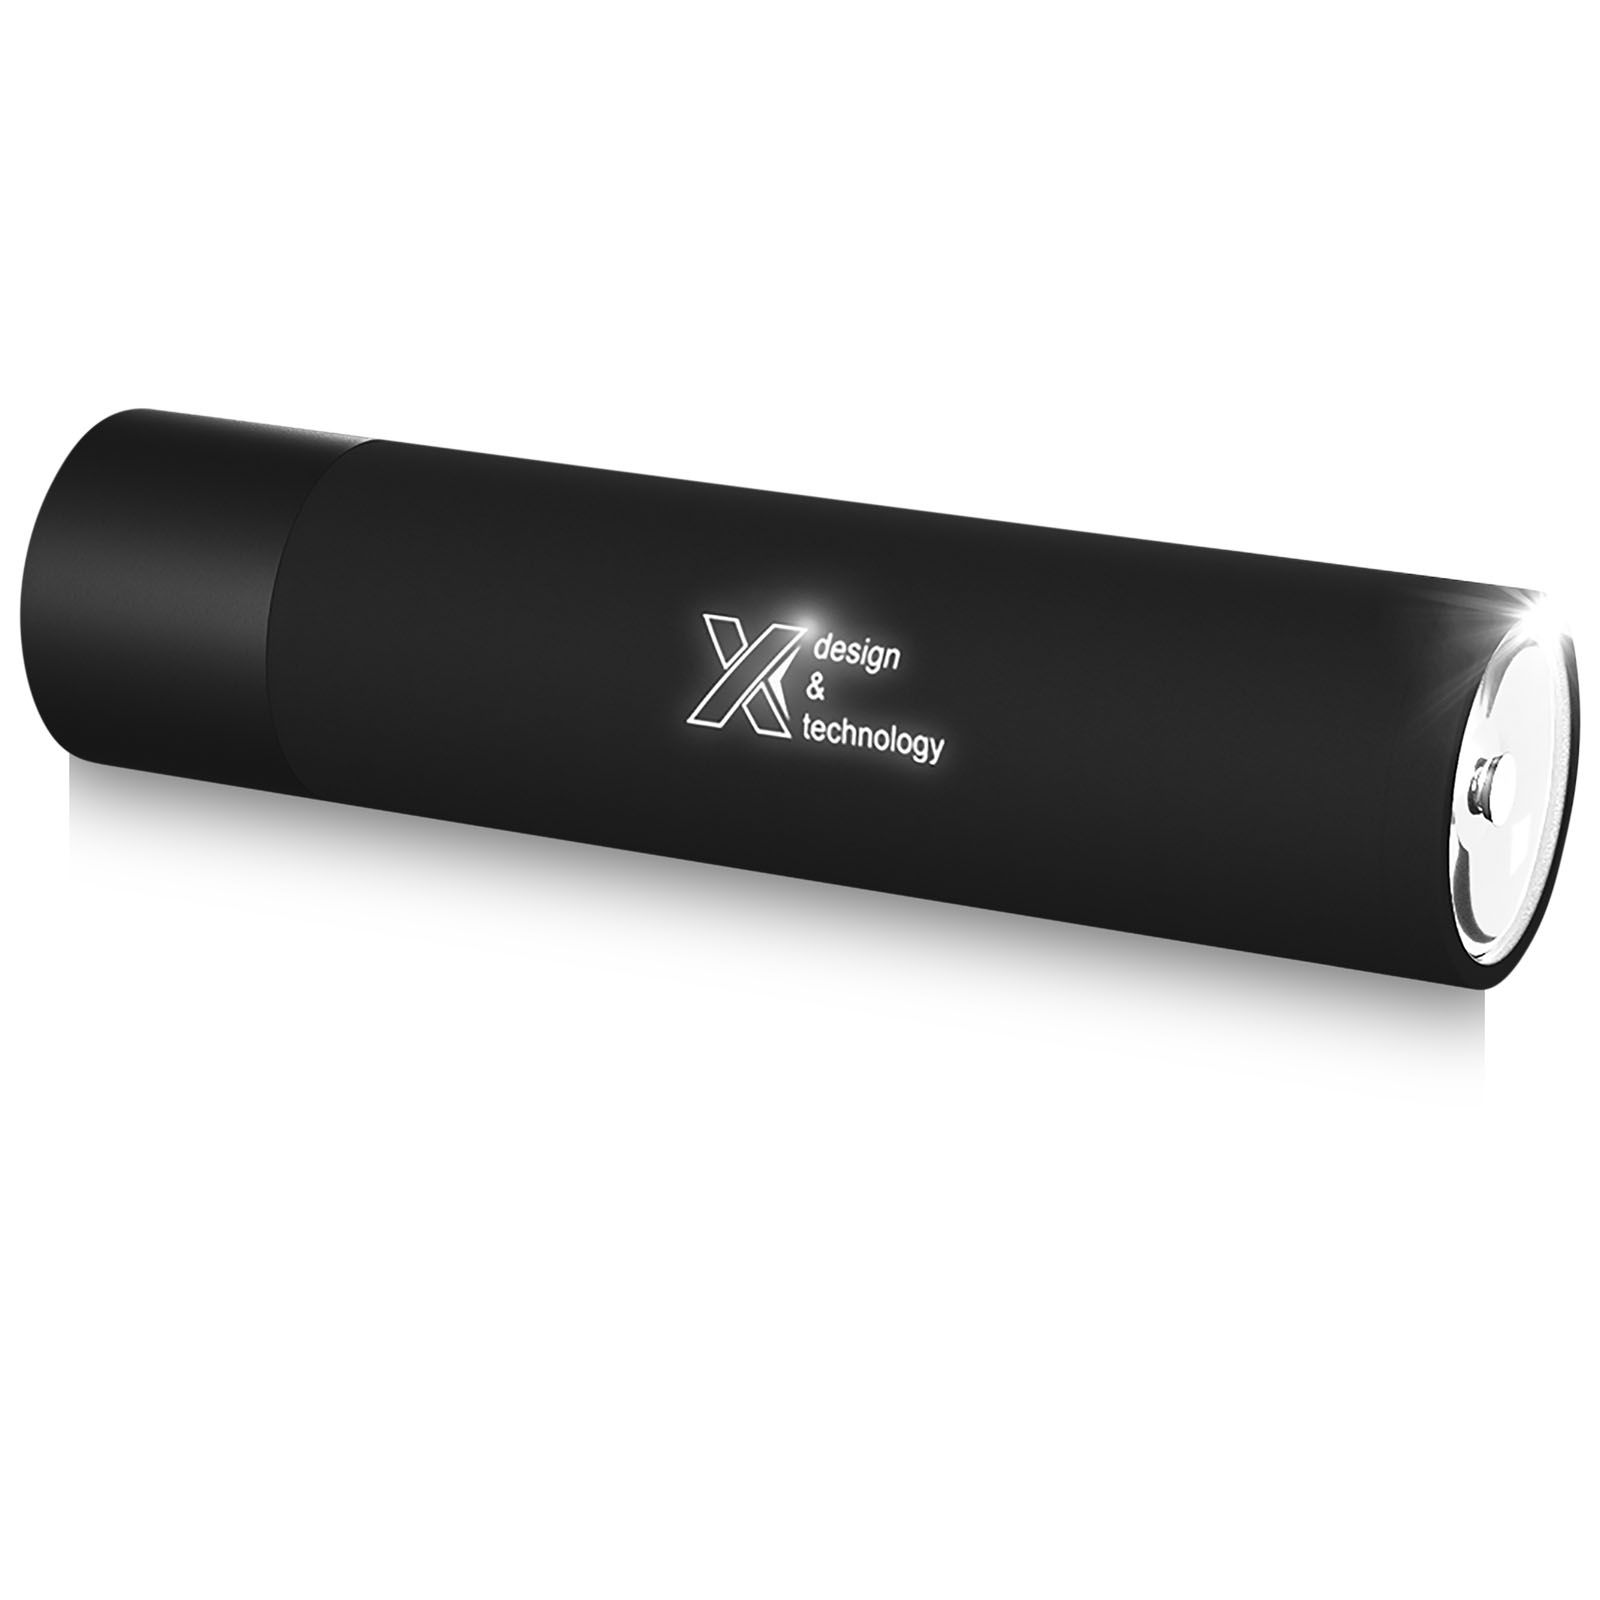 A flashlight with a soft touch, a light-up logo, and a backup charger - Dudley